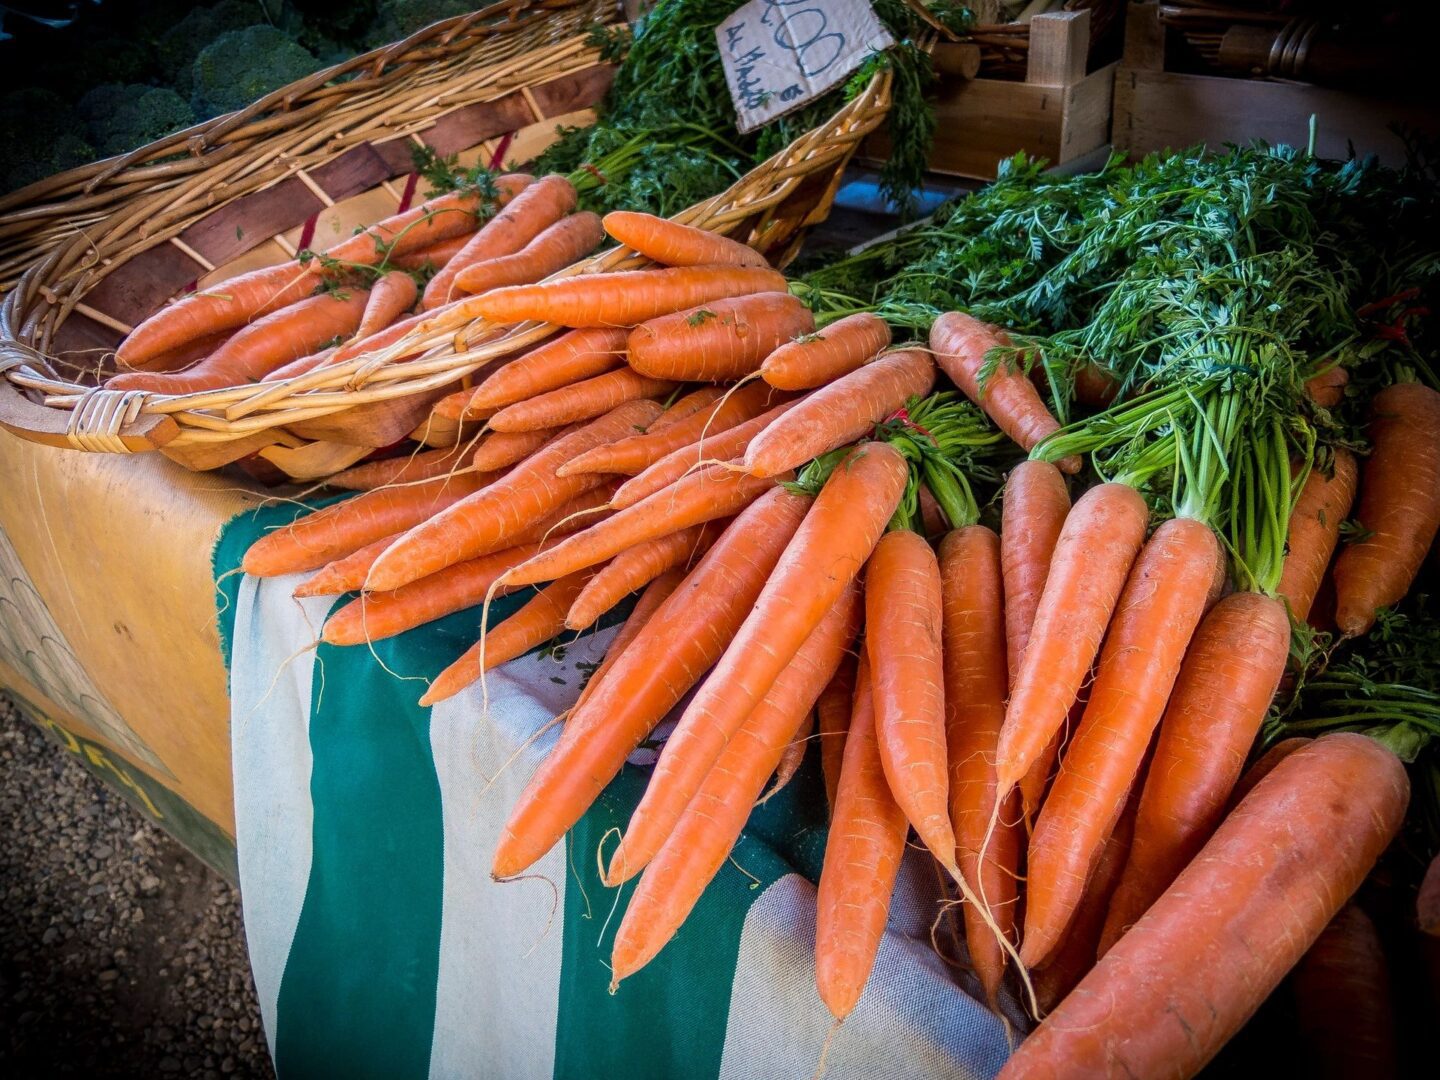 A table topped with lots of carrots next to a basket.